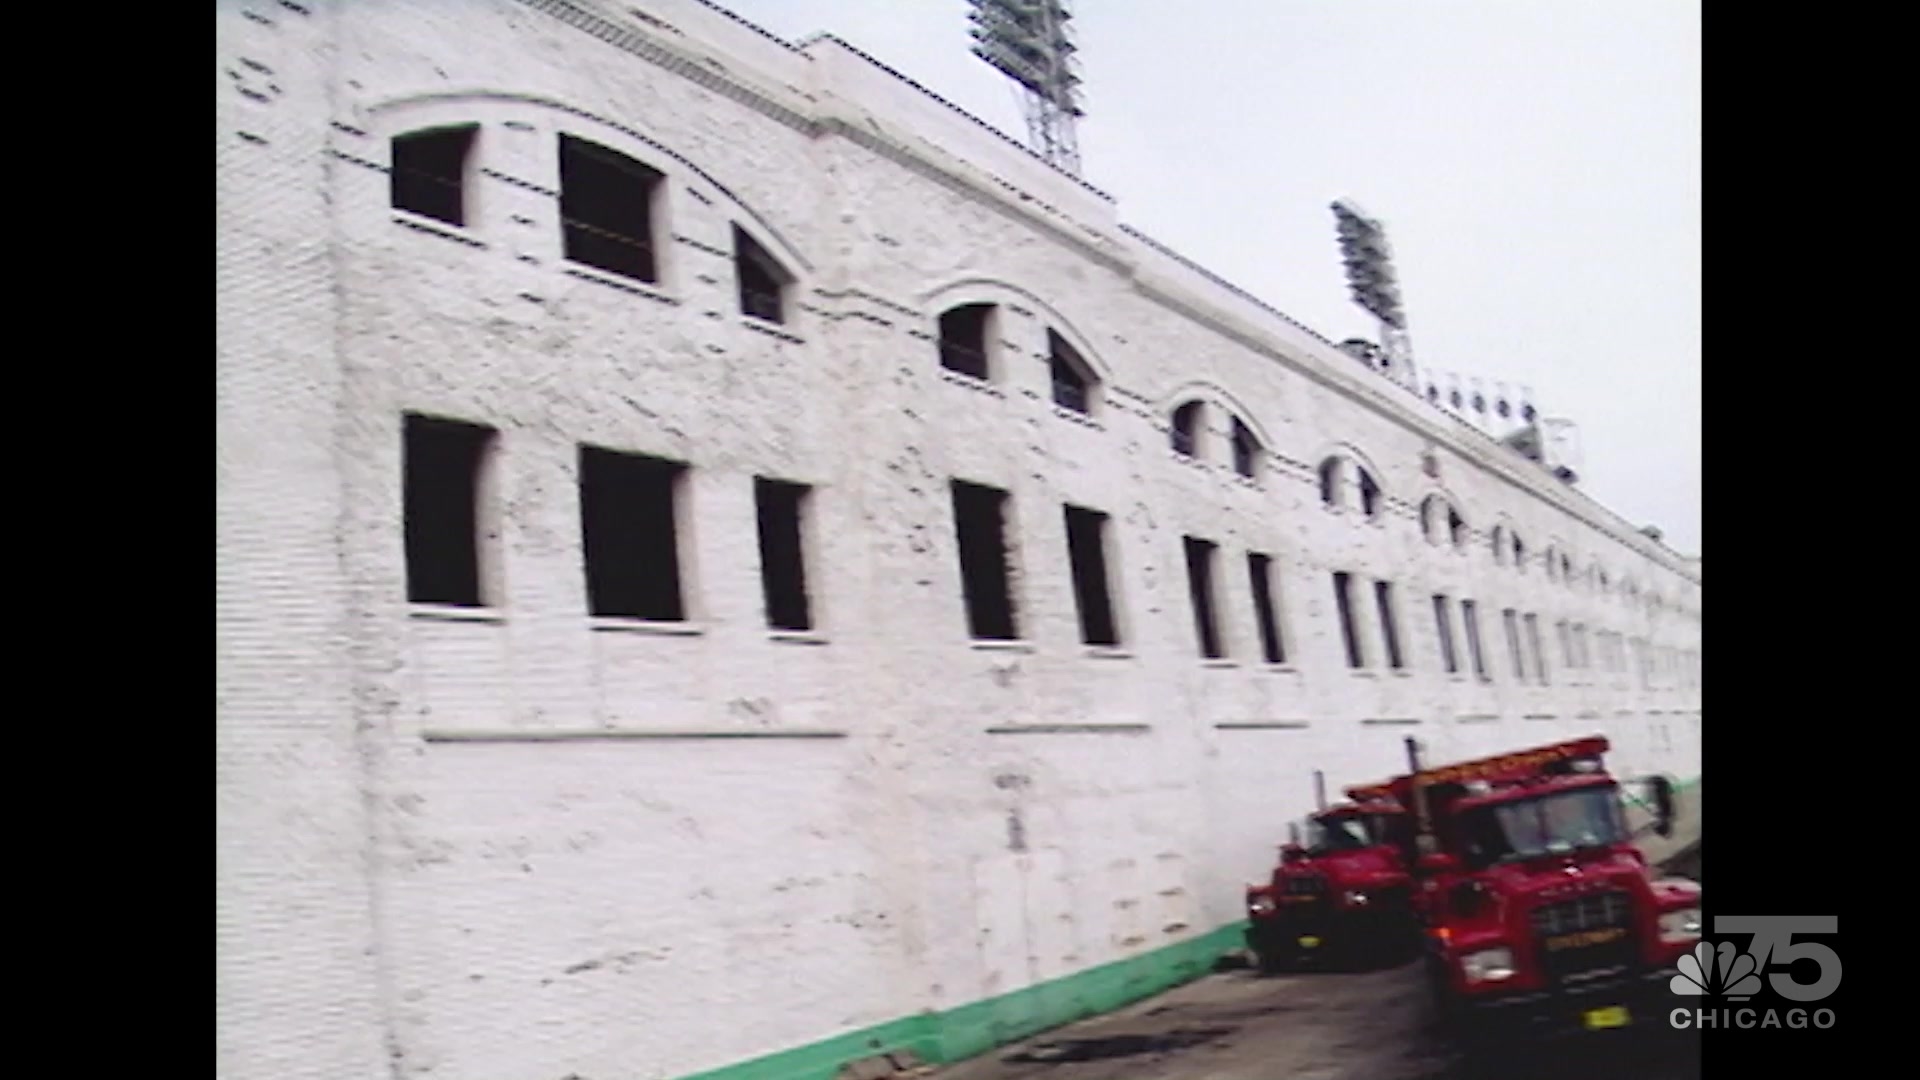 Comiskey Park - History, Photos and more of the Chicago White Sox